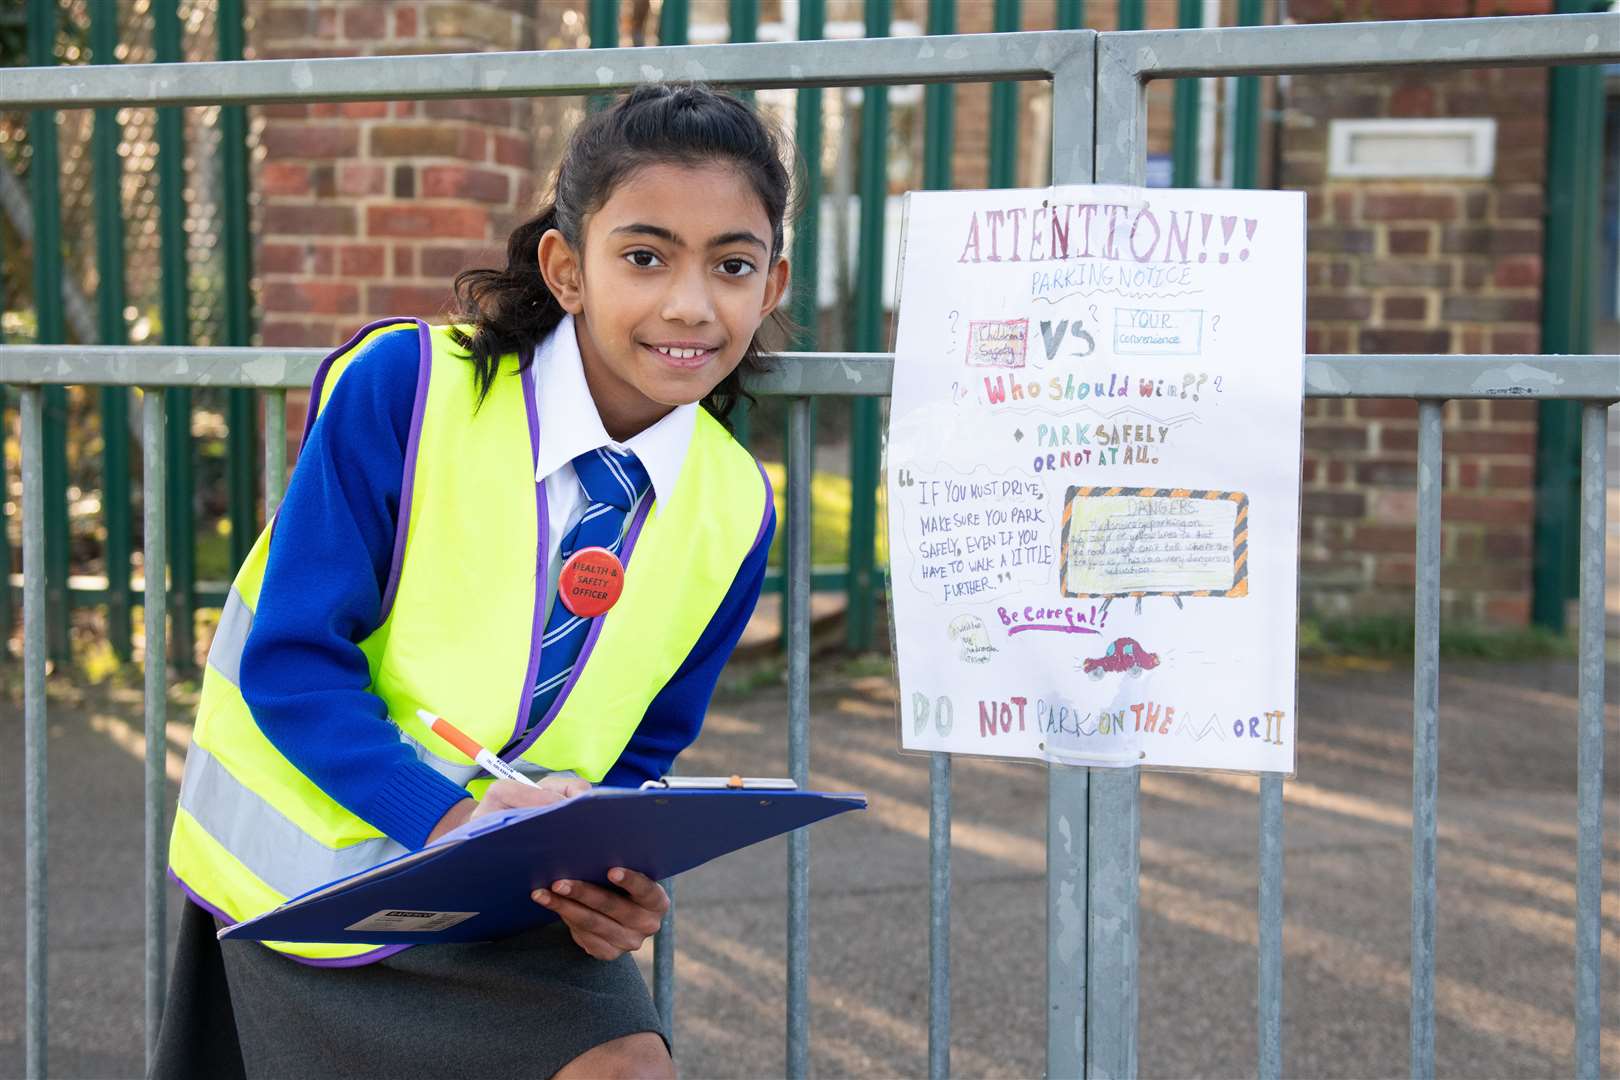 Andromeda Joseph has started raising awareness about the dangerous and busy road outside her school